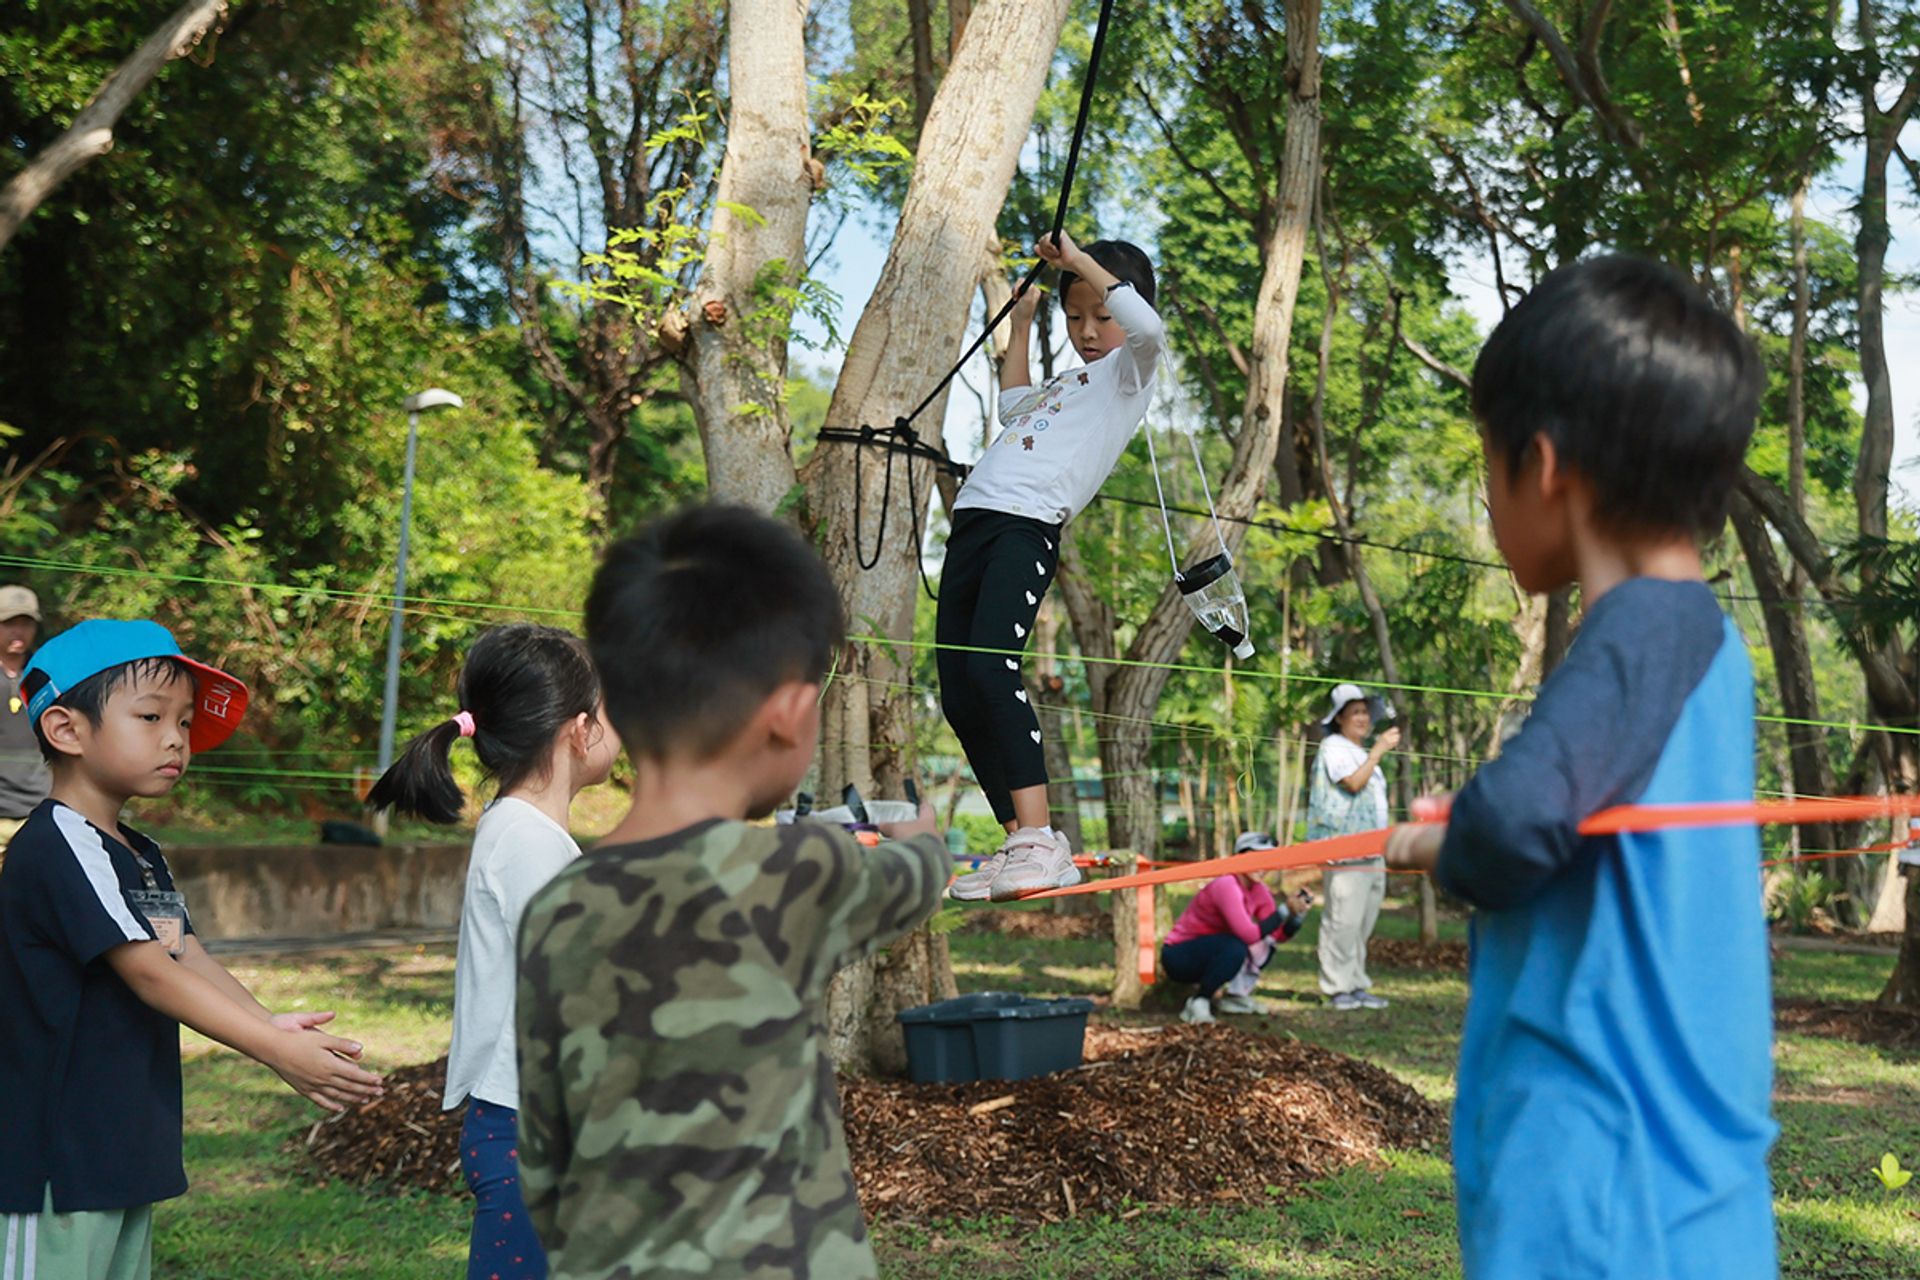 Athena Loh (second from left), Ng Zhi Qian (in green) and Wang Yan (far right) help to stabilise and support their teammate Khor Xin Yu as Hong Jingpeng (far left) watches by the side. Xin Yu is attempting the Spider Web Challenge to fetch water while walking on ropes hanging about a metre off the ground.